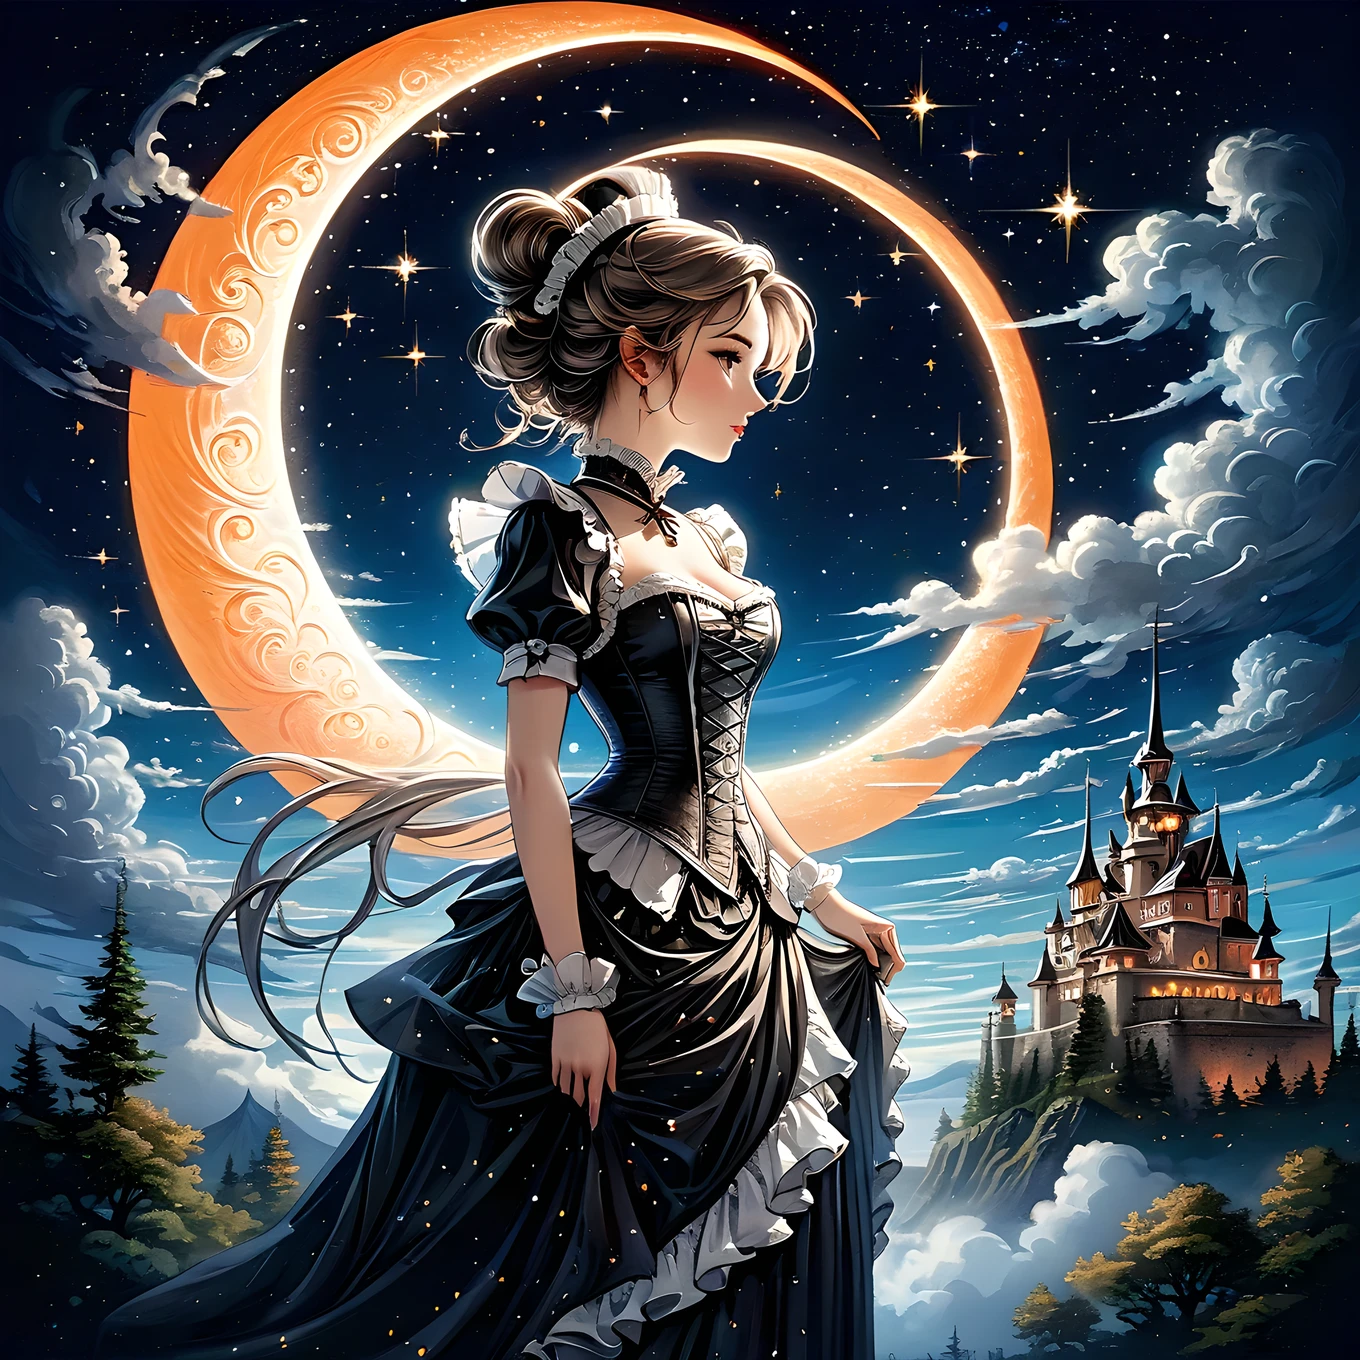 Elaborate illustration of maid with aura of loyalty, intricate detailed corset, profile, vivid contrasts, gentle touch rendering, exact detail, precision, fluffy clouds and crescent moon, single shooting star, (orange neon shooting star trails), high quality oil painting, stunning Beautiful touch rendering, Artistic clouds and moon, Fantasy, Fog around an old castle, glittering star